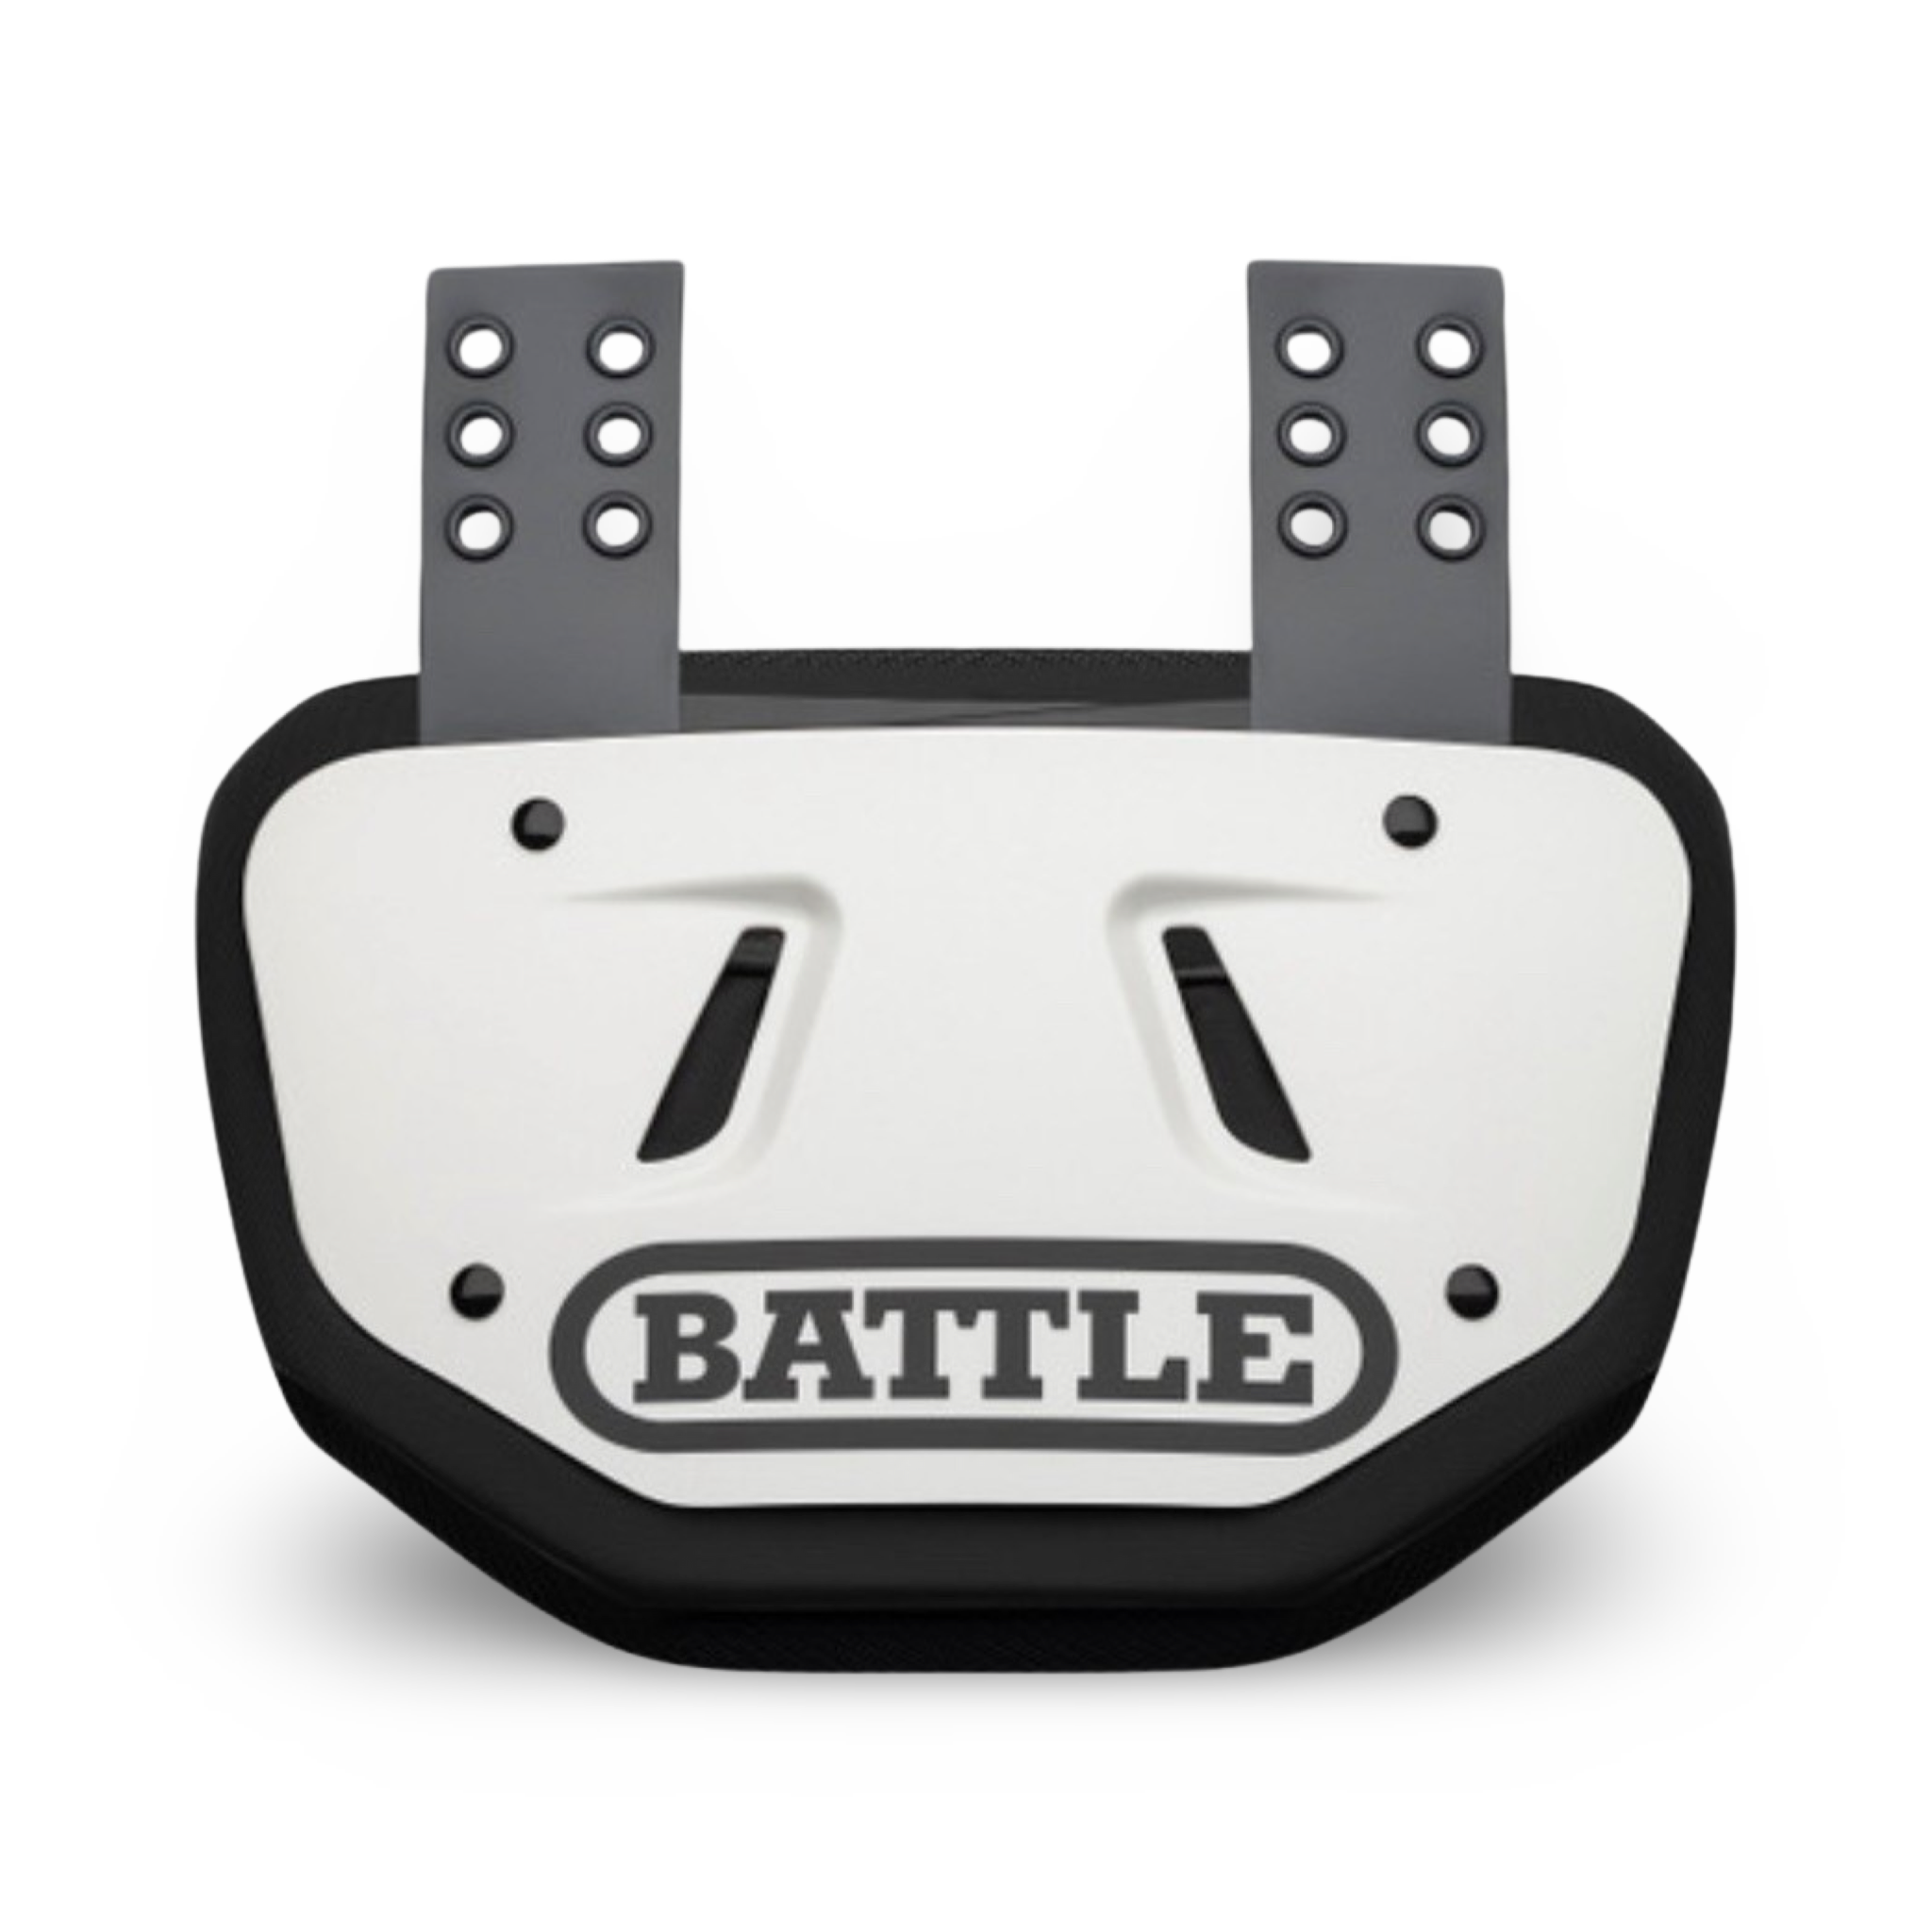 Battle back plate white with black logo - back protector